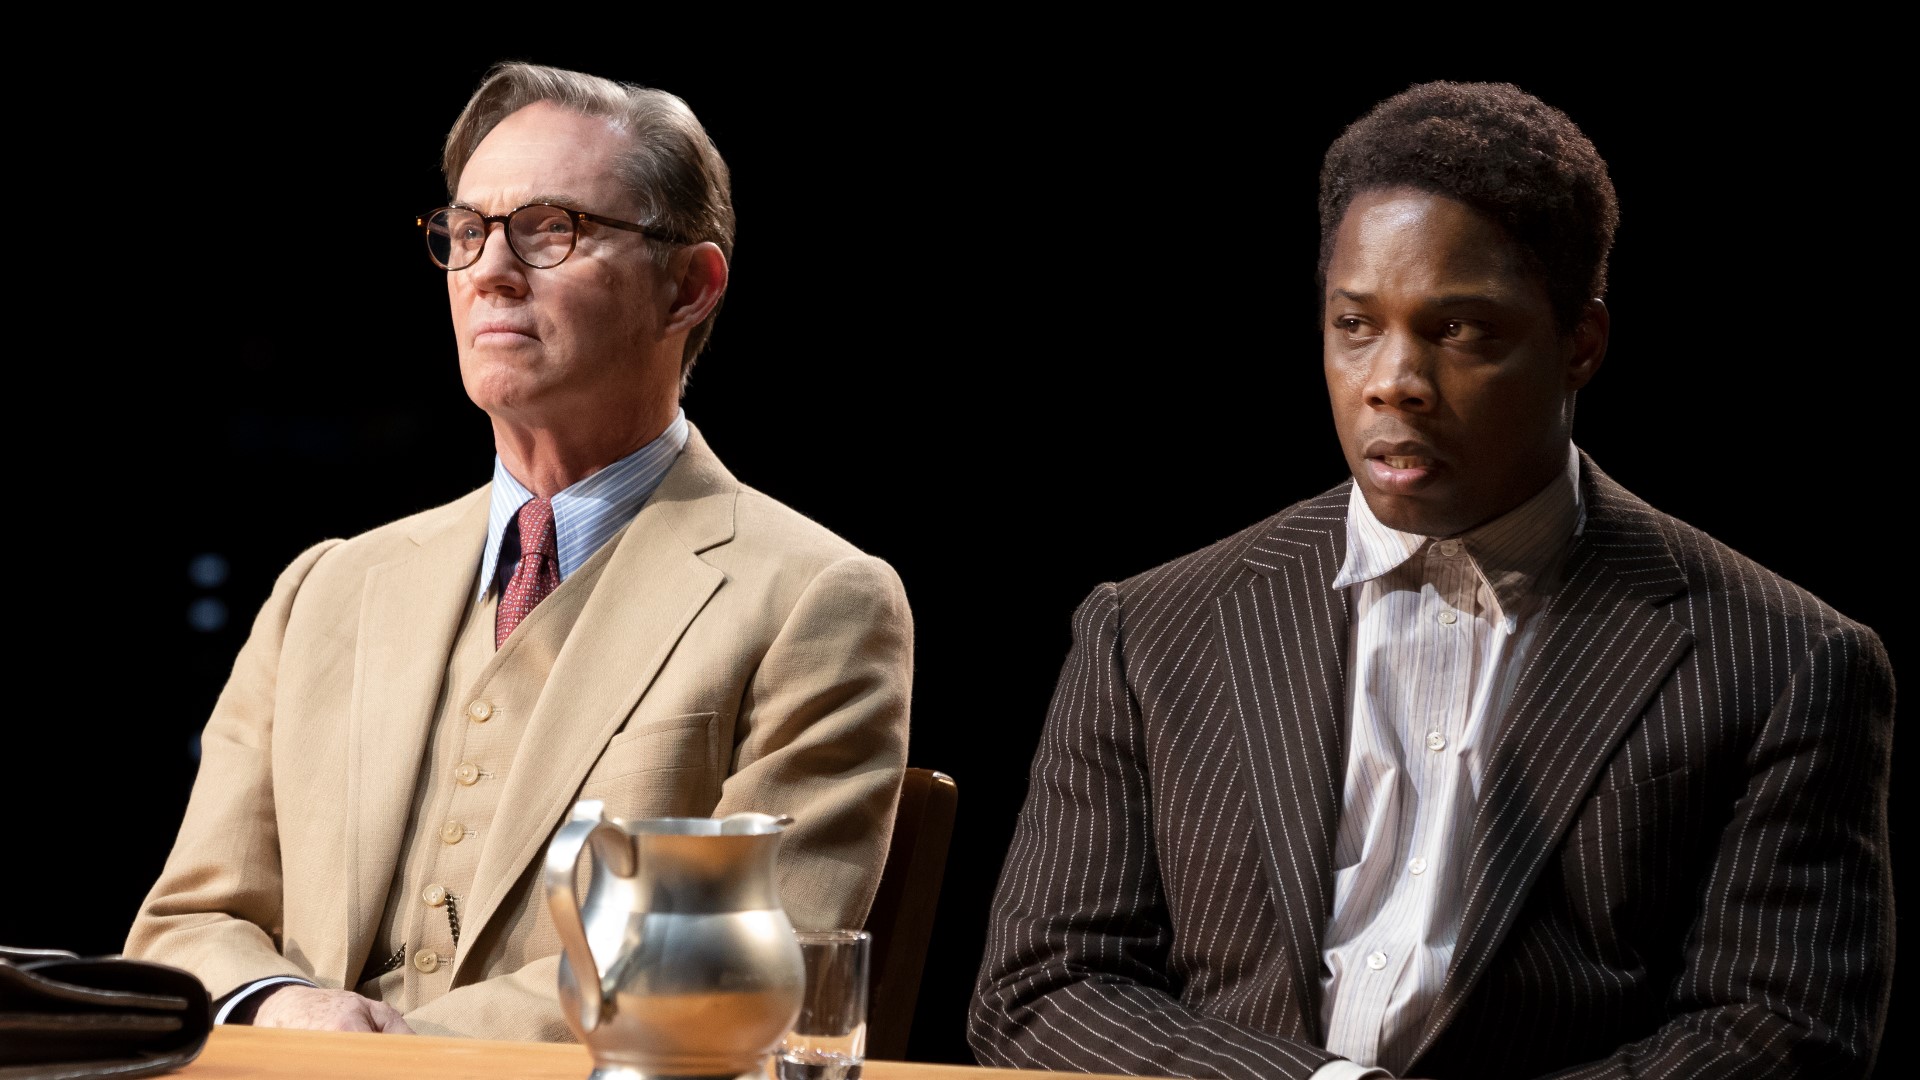 The play by Aaron Sorkin is a stage adaptation of Harper Lee's iconic classic novel.